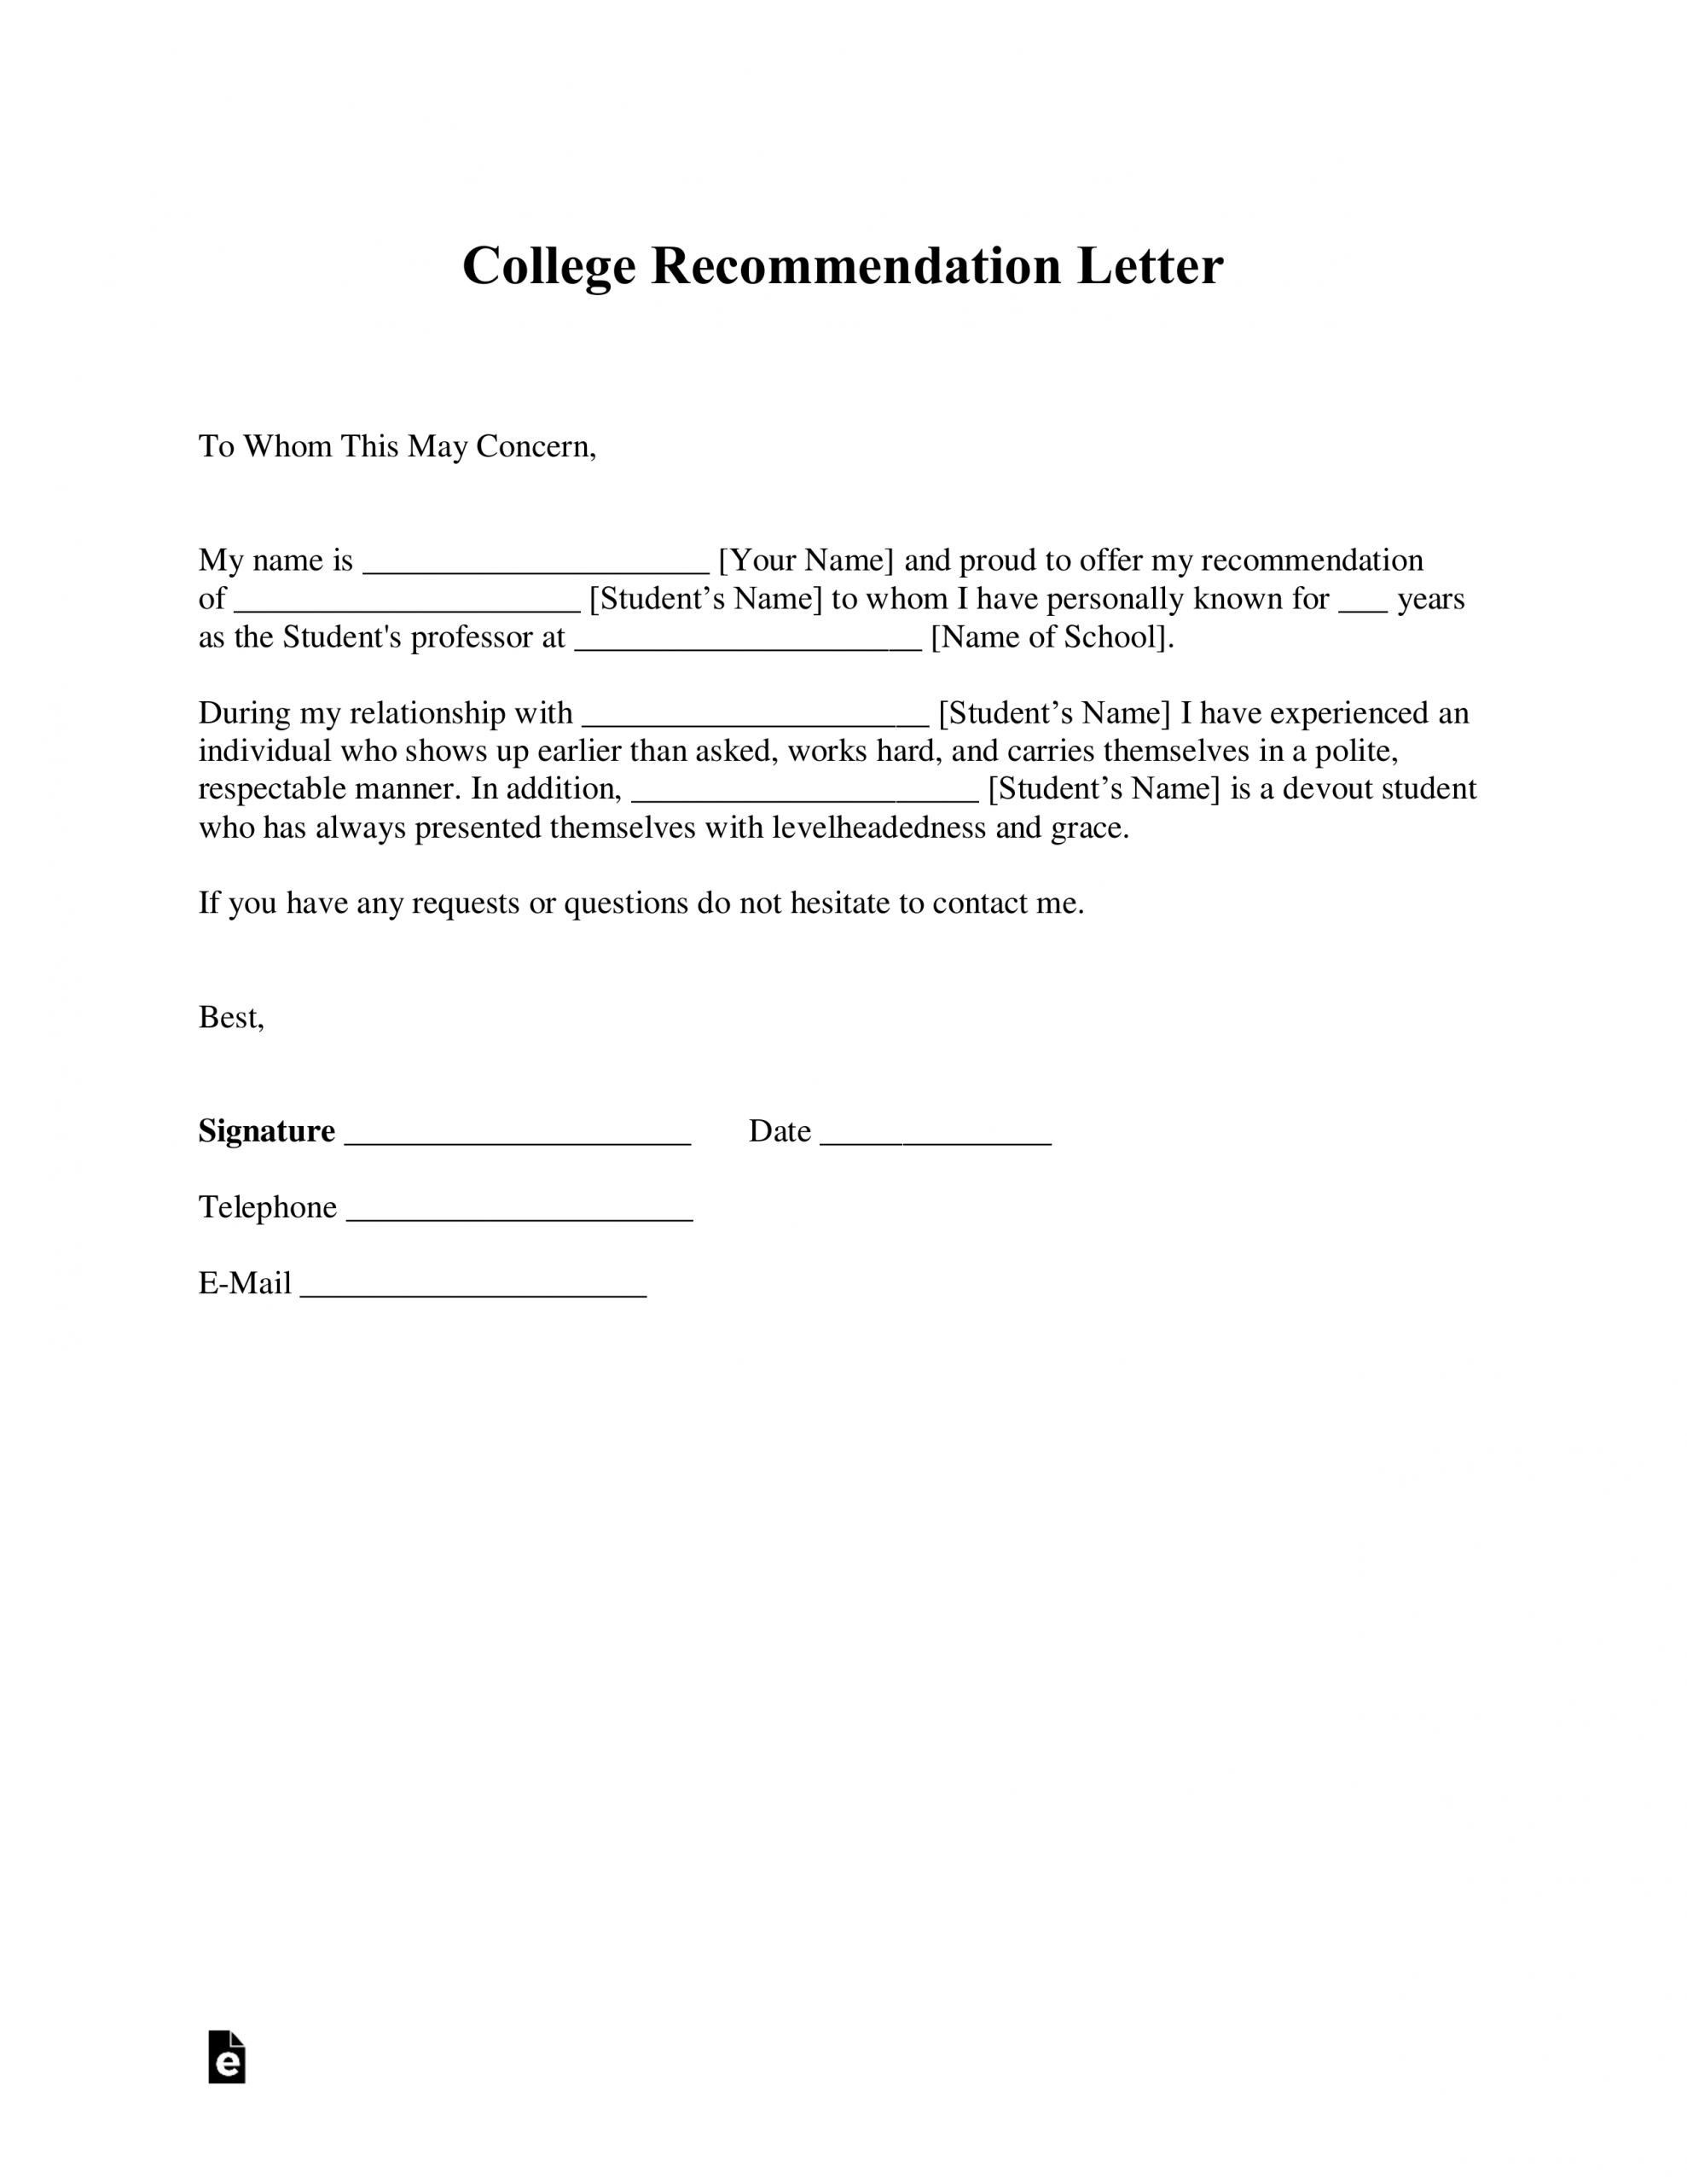 Free College Recommendation Letter Template With Samples in sizing 2550 X 3301